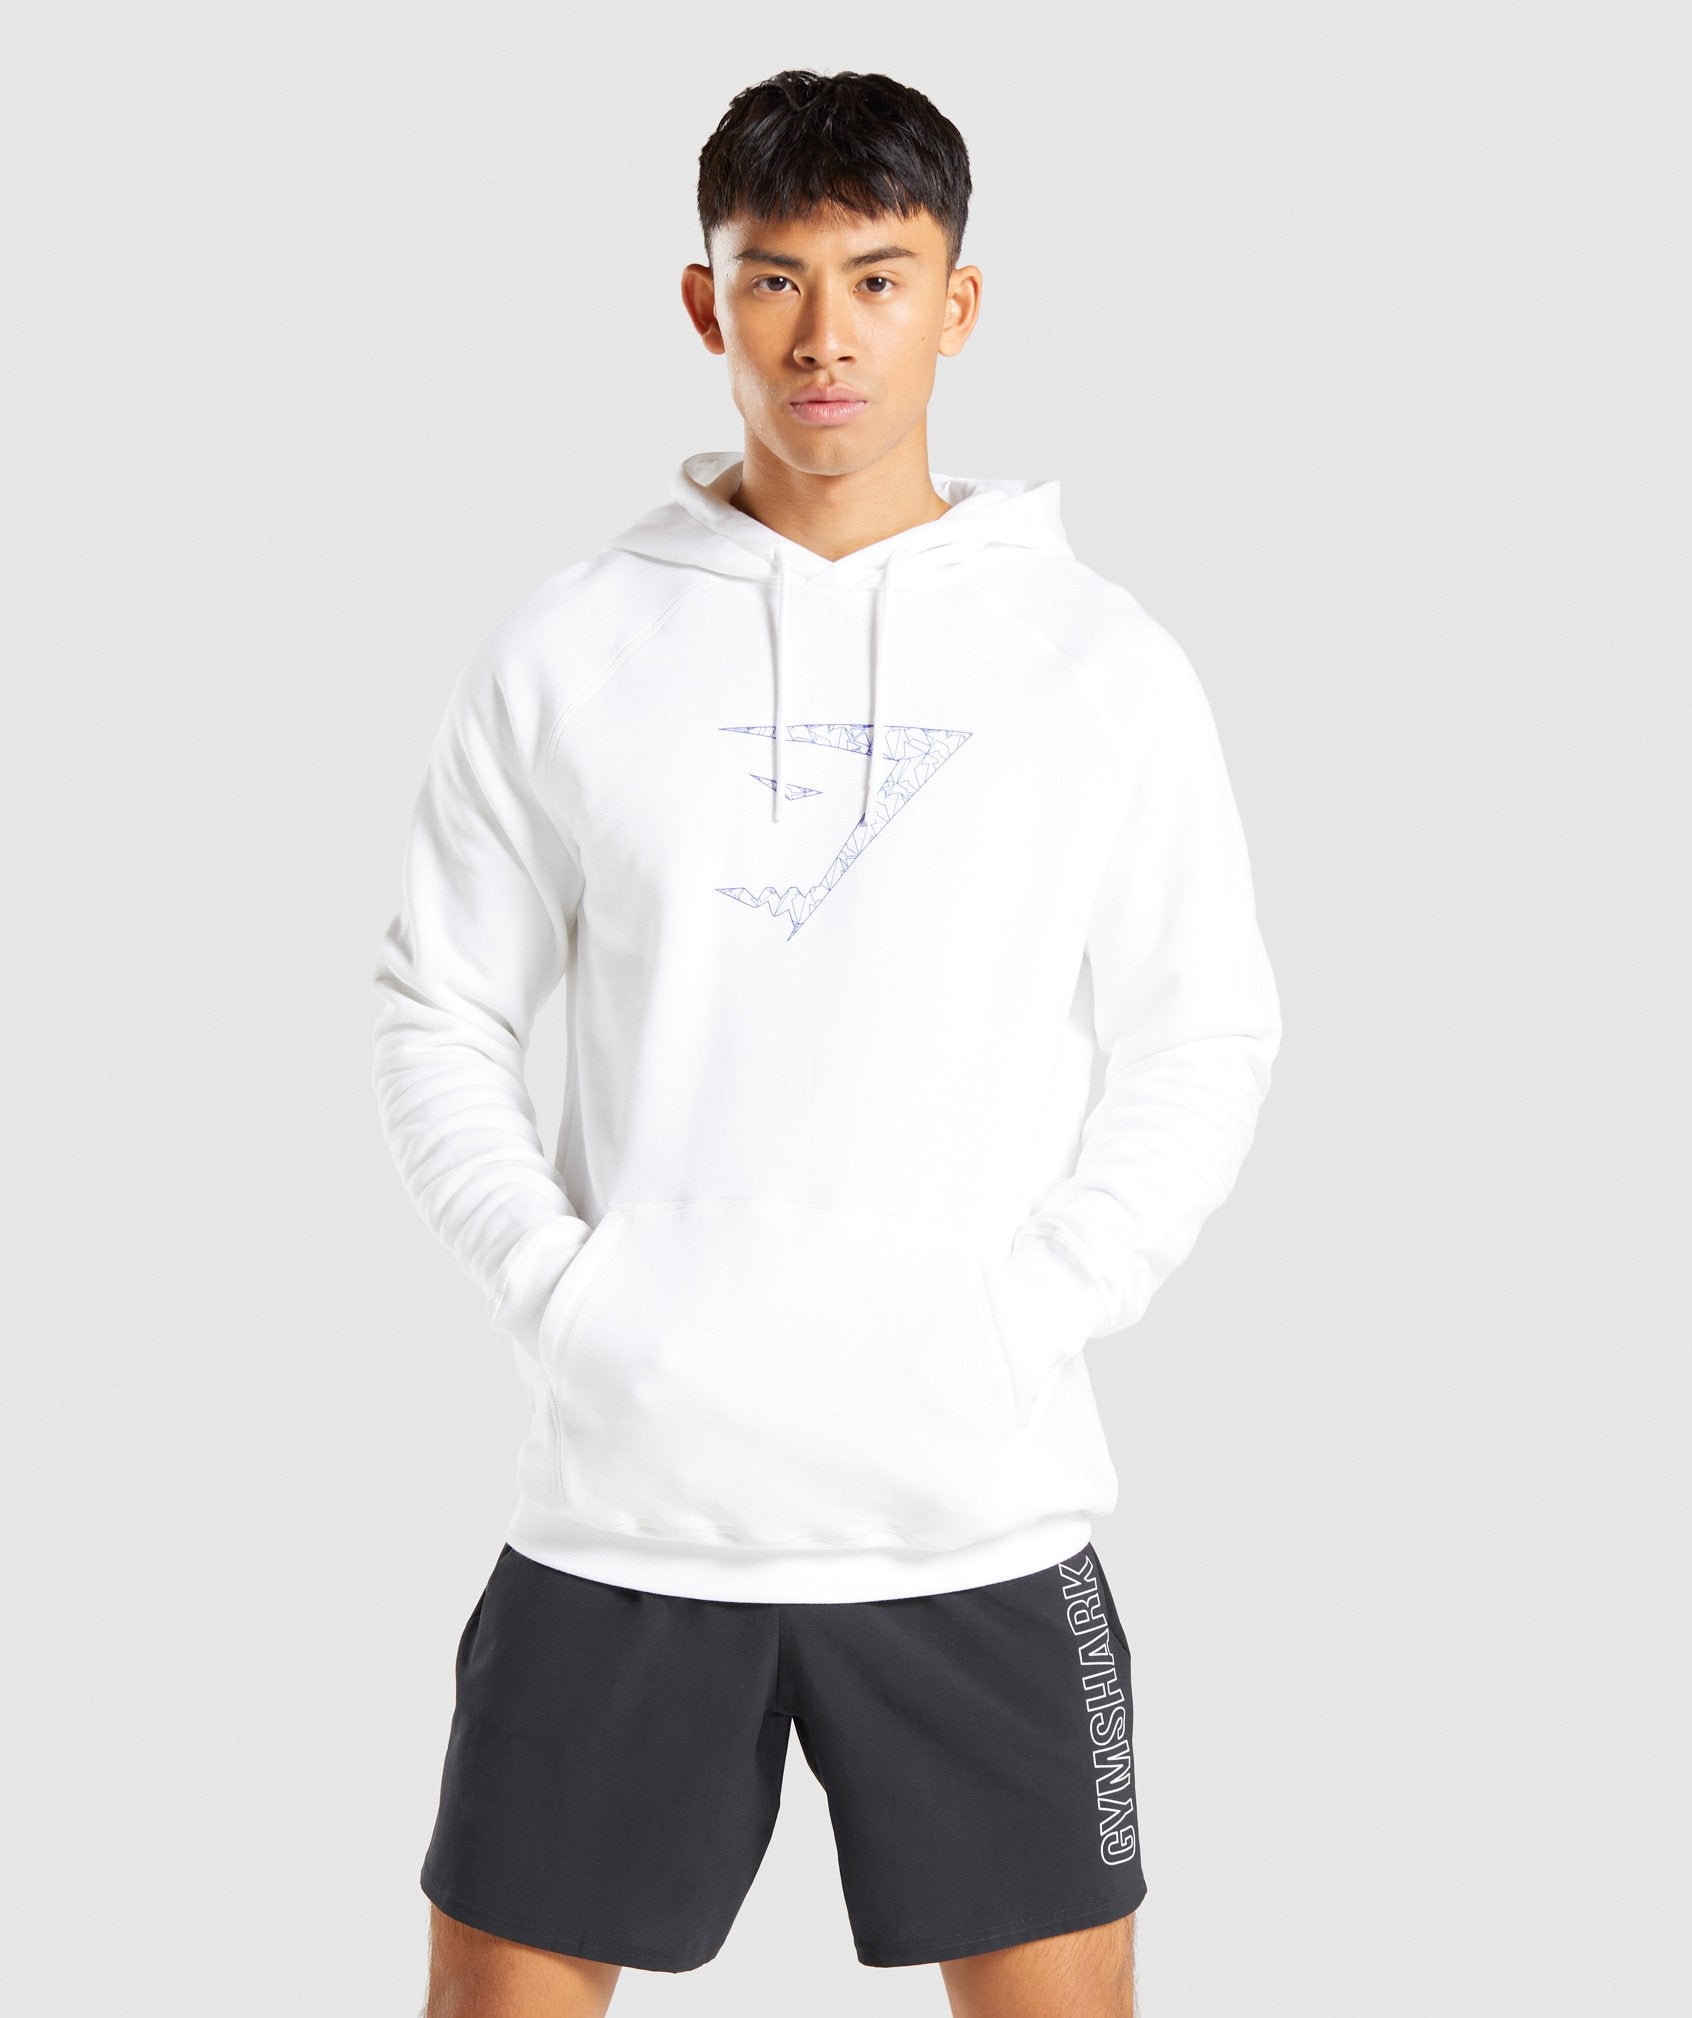 Infill Hoodie in White - view 1